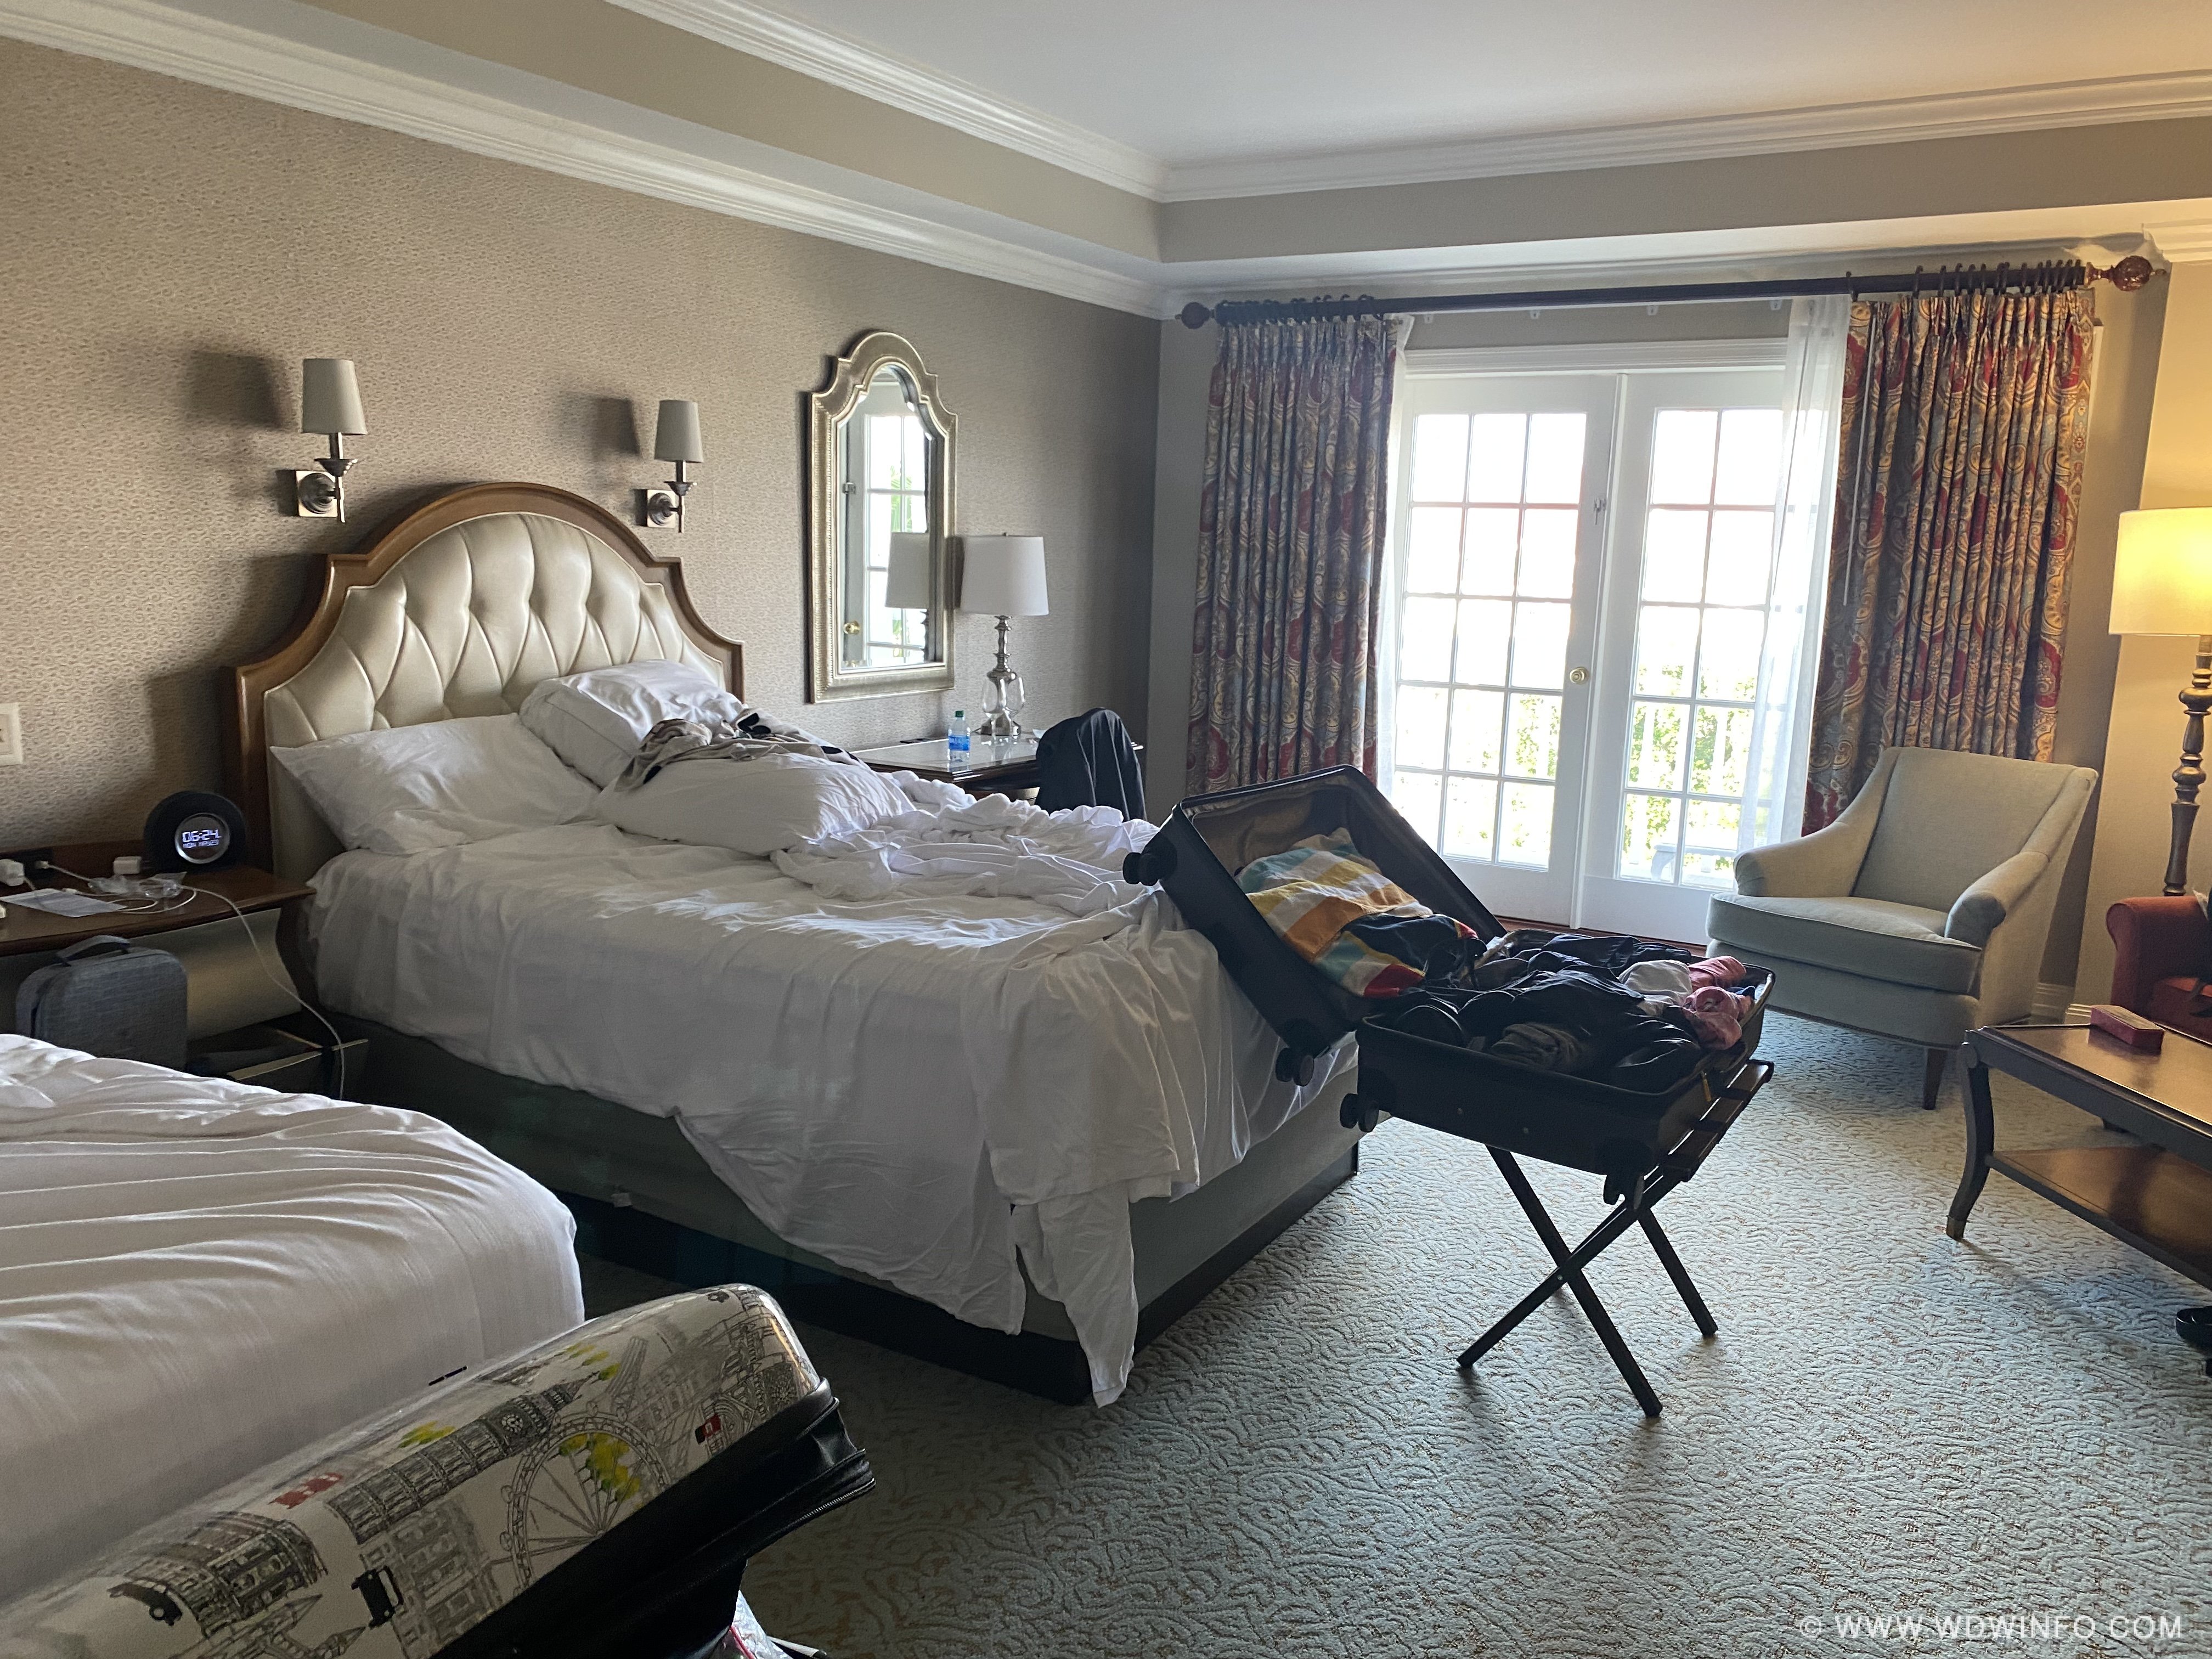 Grand Floridian RPC Royal Palm Club Main Building 2 Queen Deluxe Room May 2022